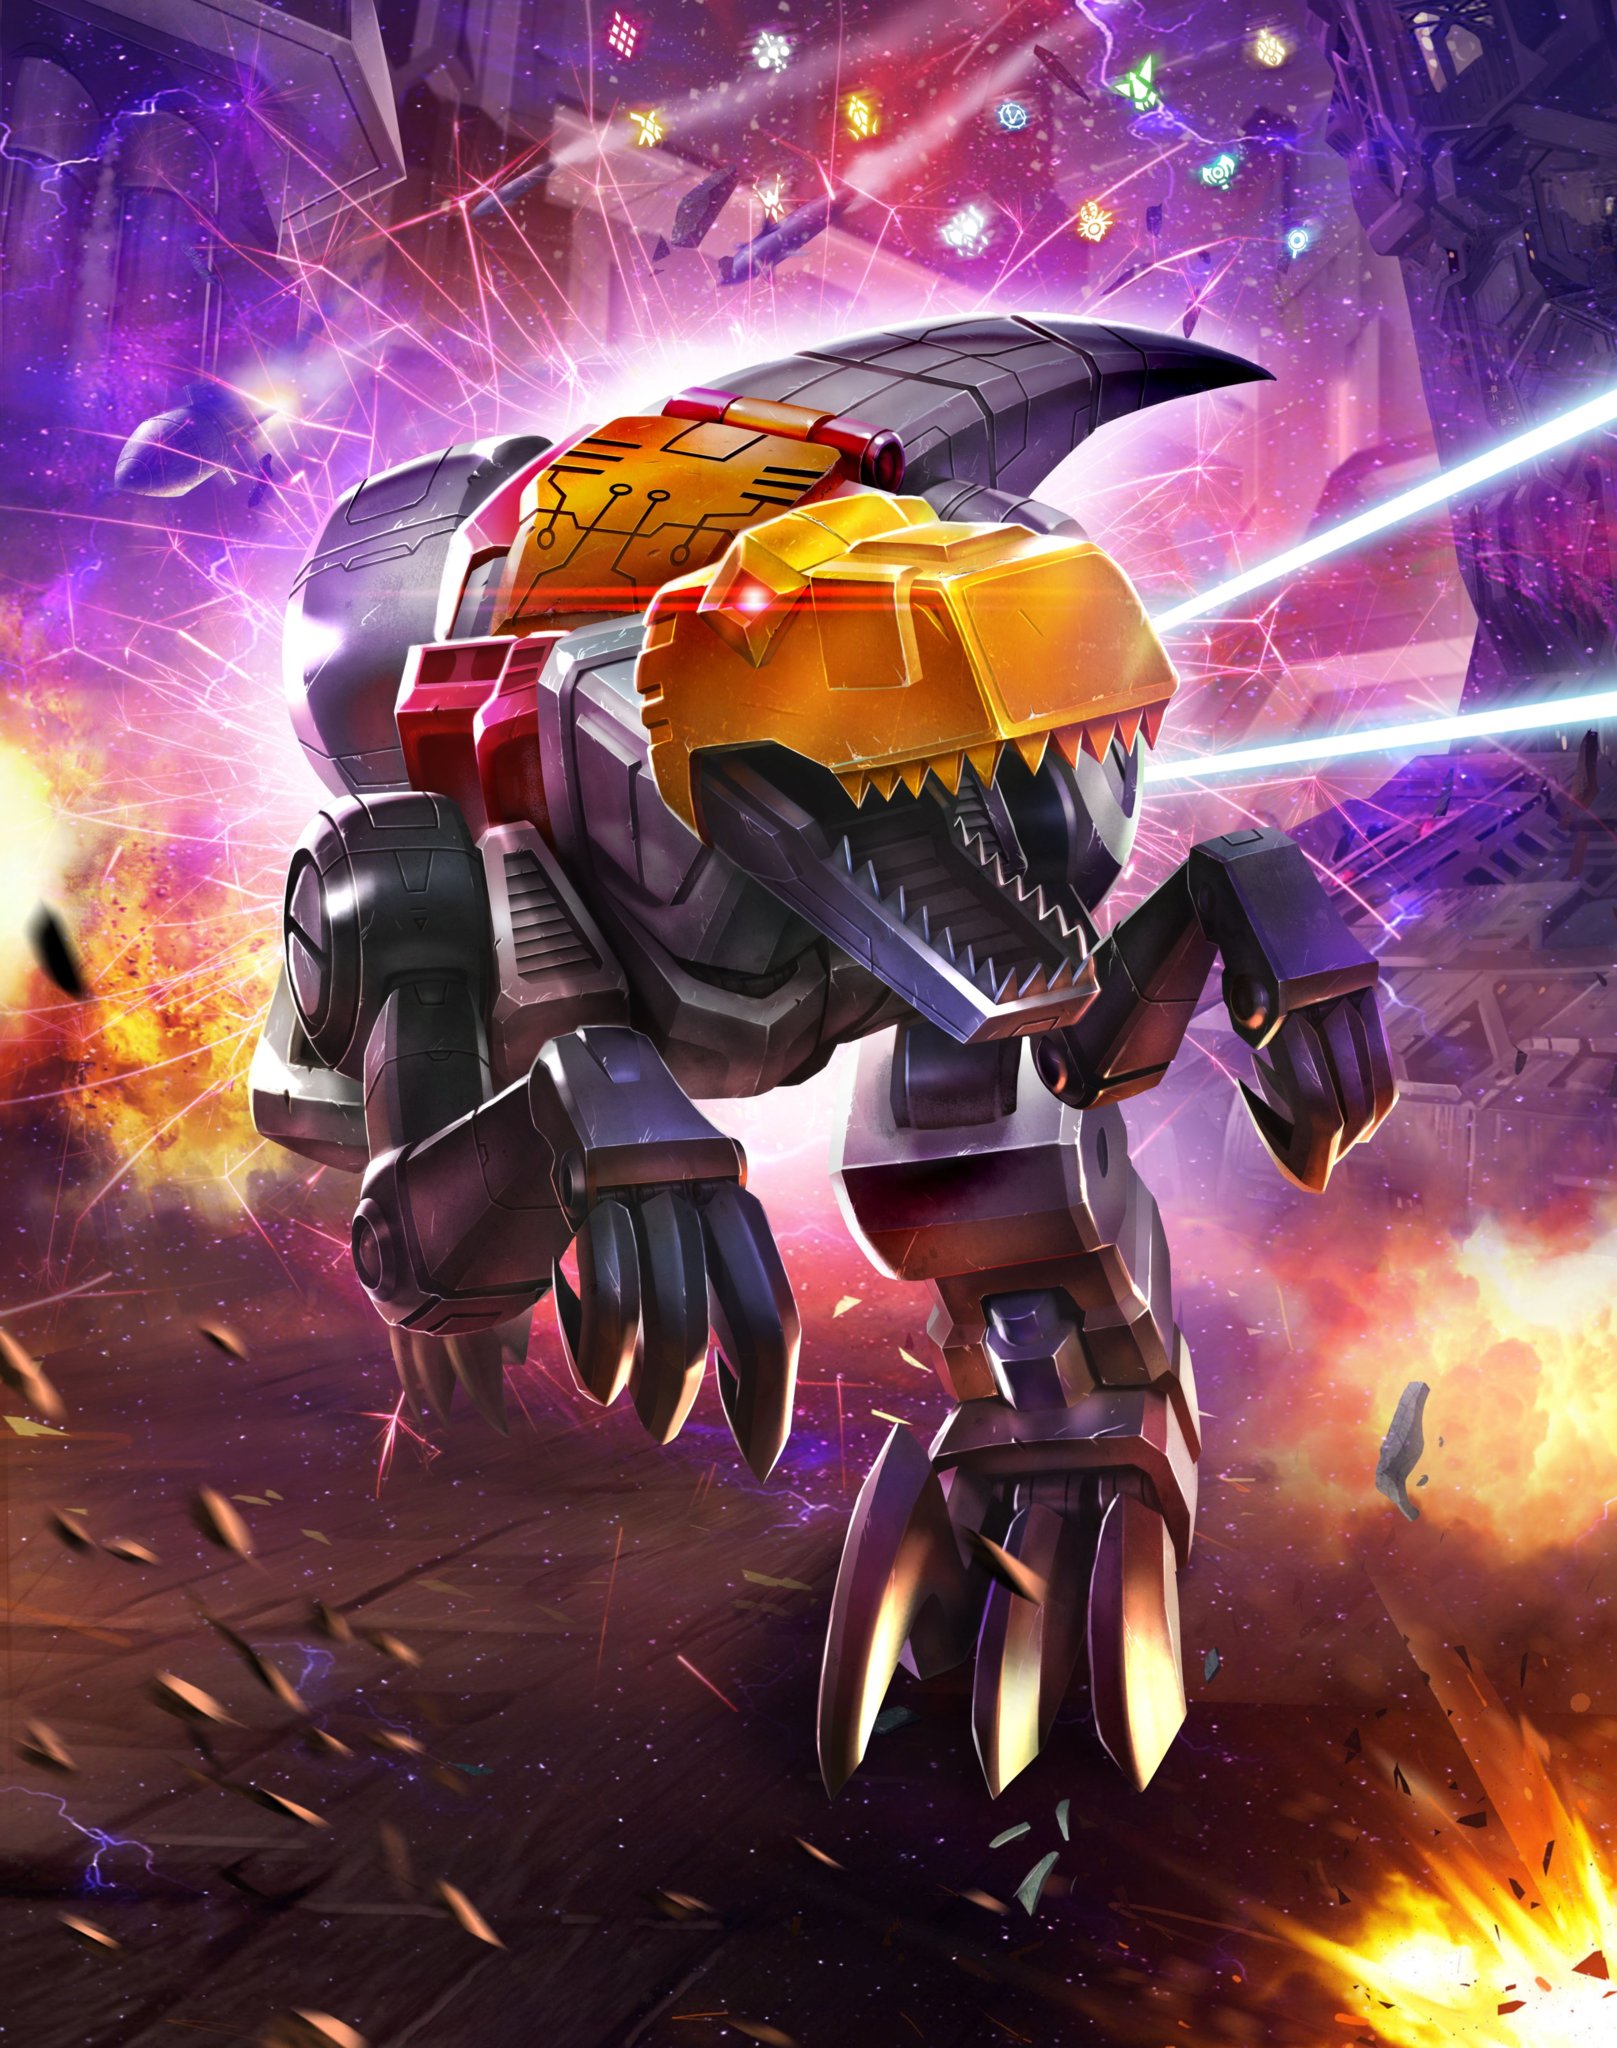 More Transformers Power Of The Primes Official Image Dinobot